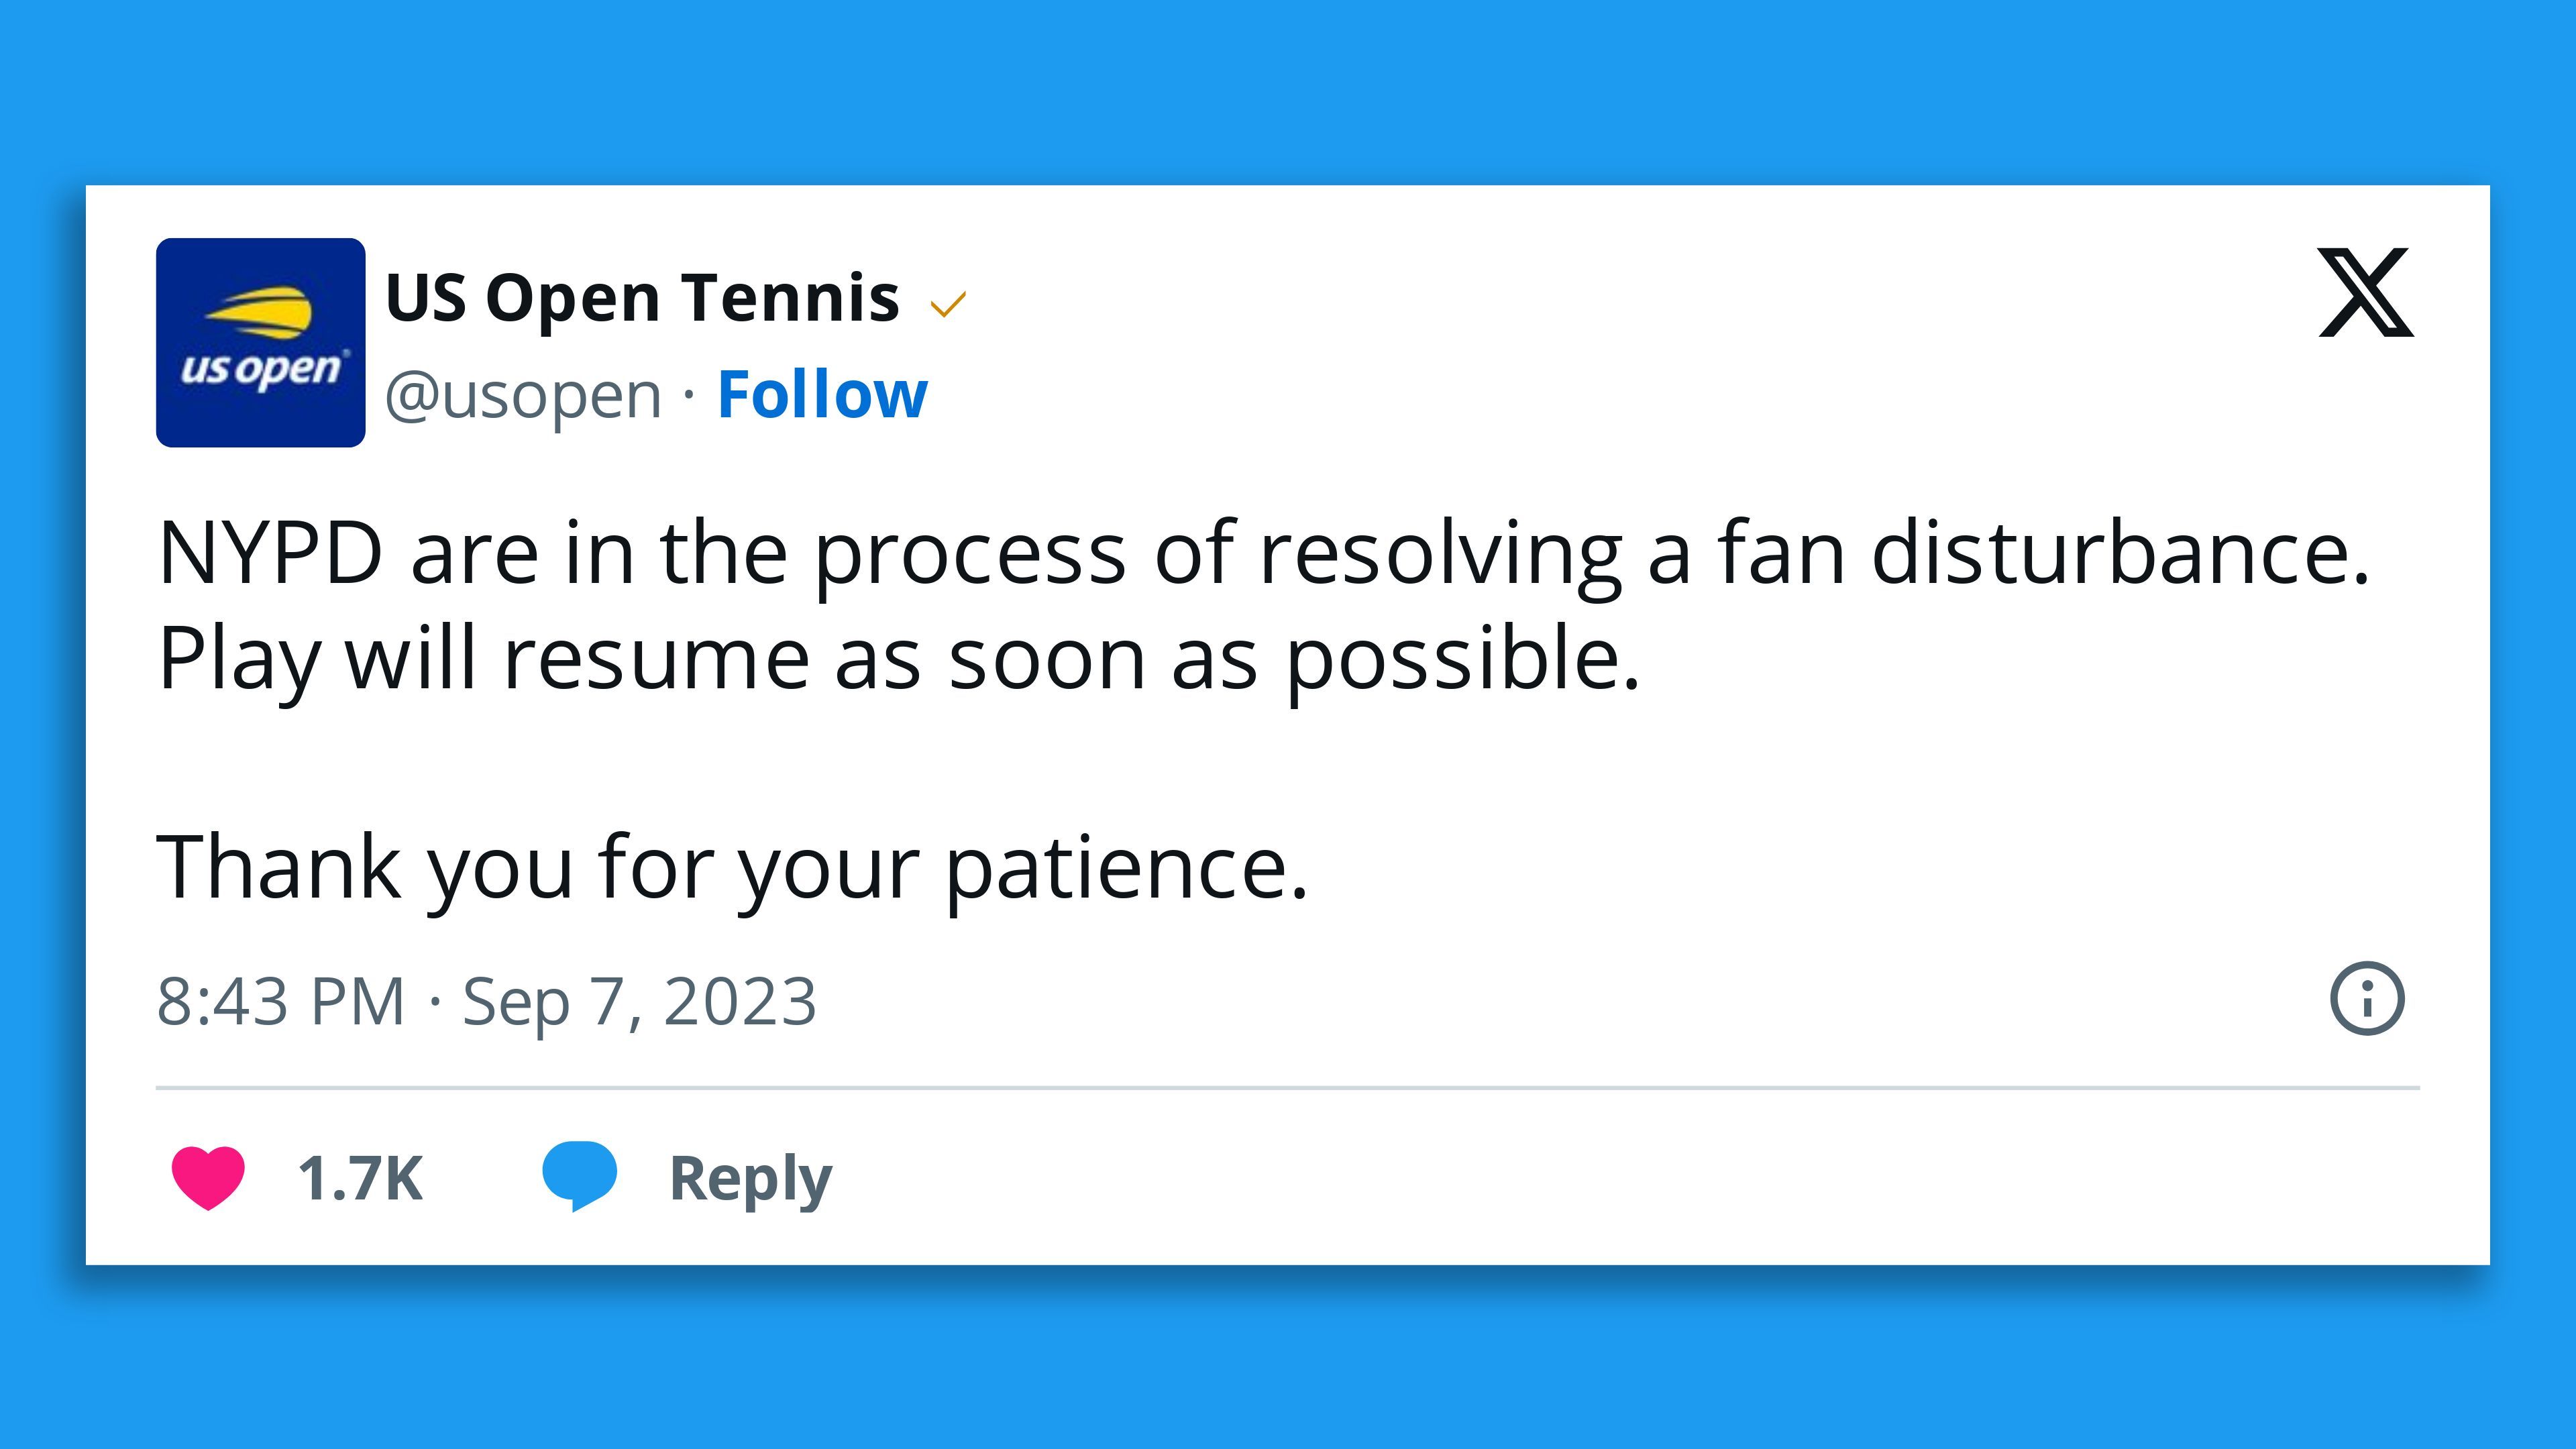 A screenshot of a U.S. Open Tennis tweet, saying: "NYPD are in the process of resolving a fan disturbance. Play will resume as soon as possible.  Thank you for your patience."